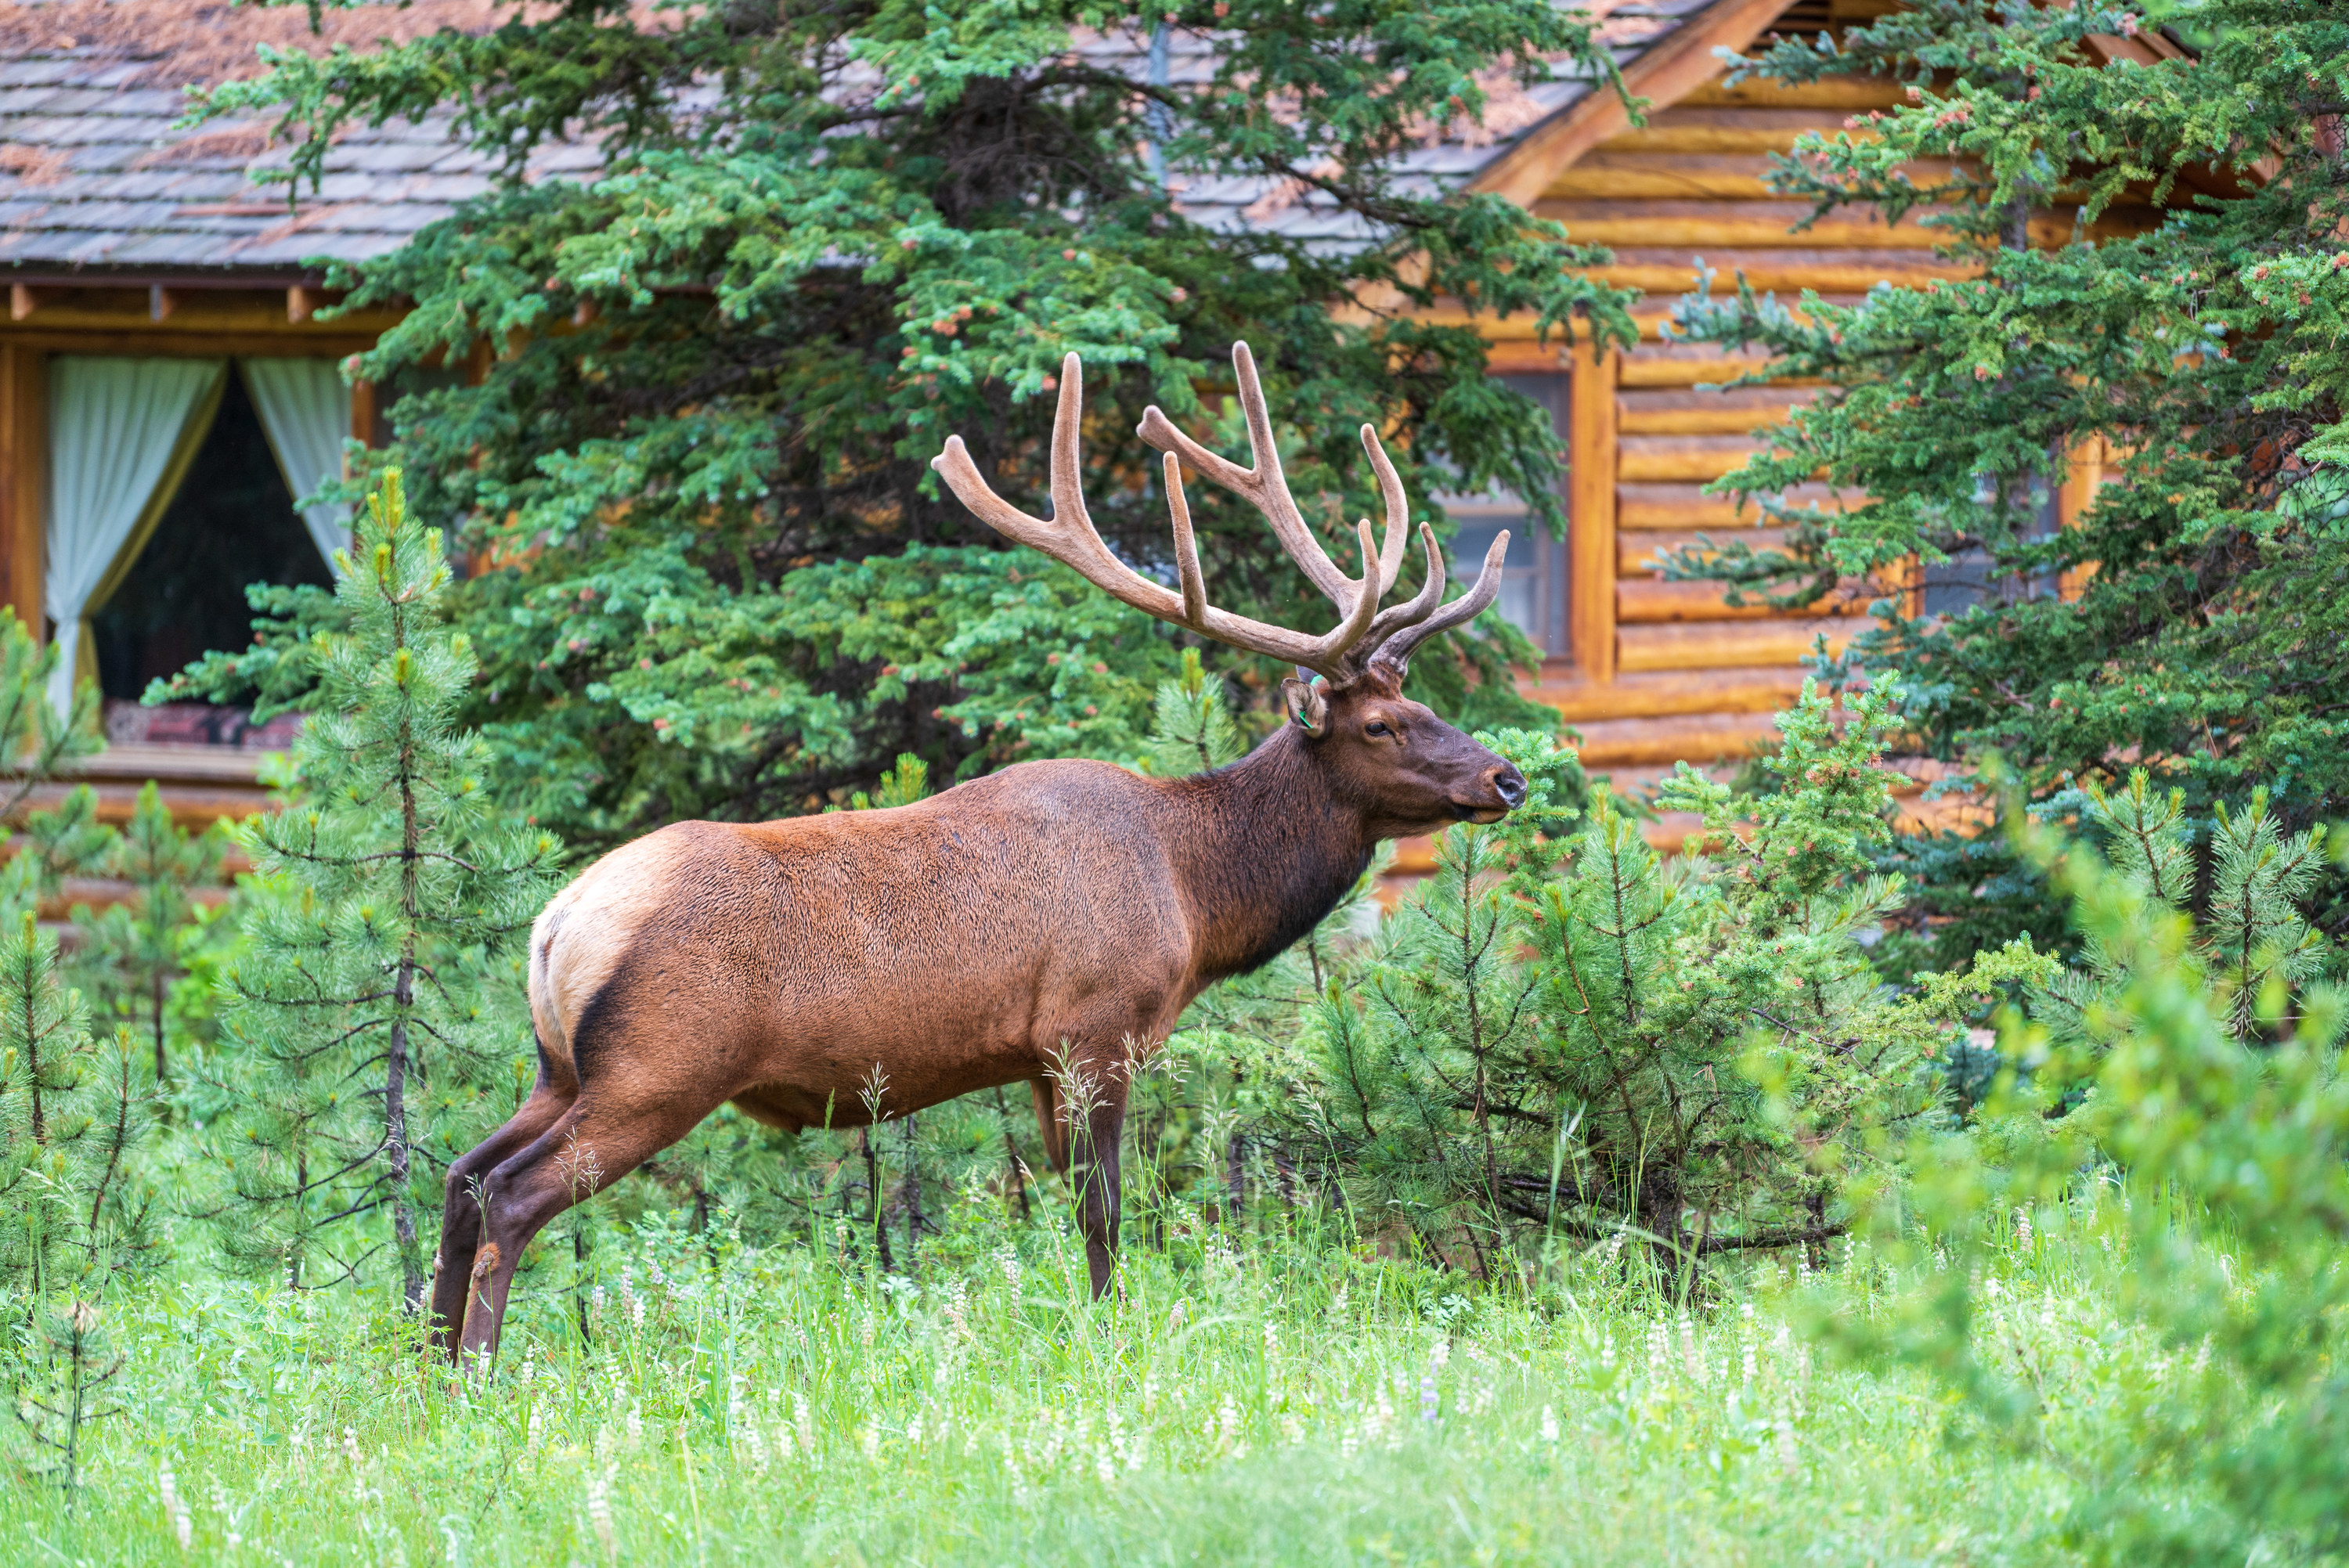 Elk with antlers near a cabin